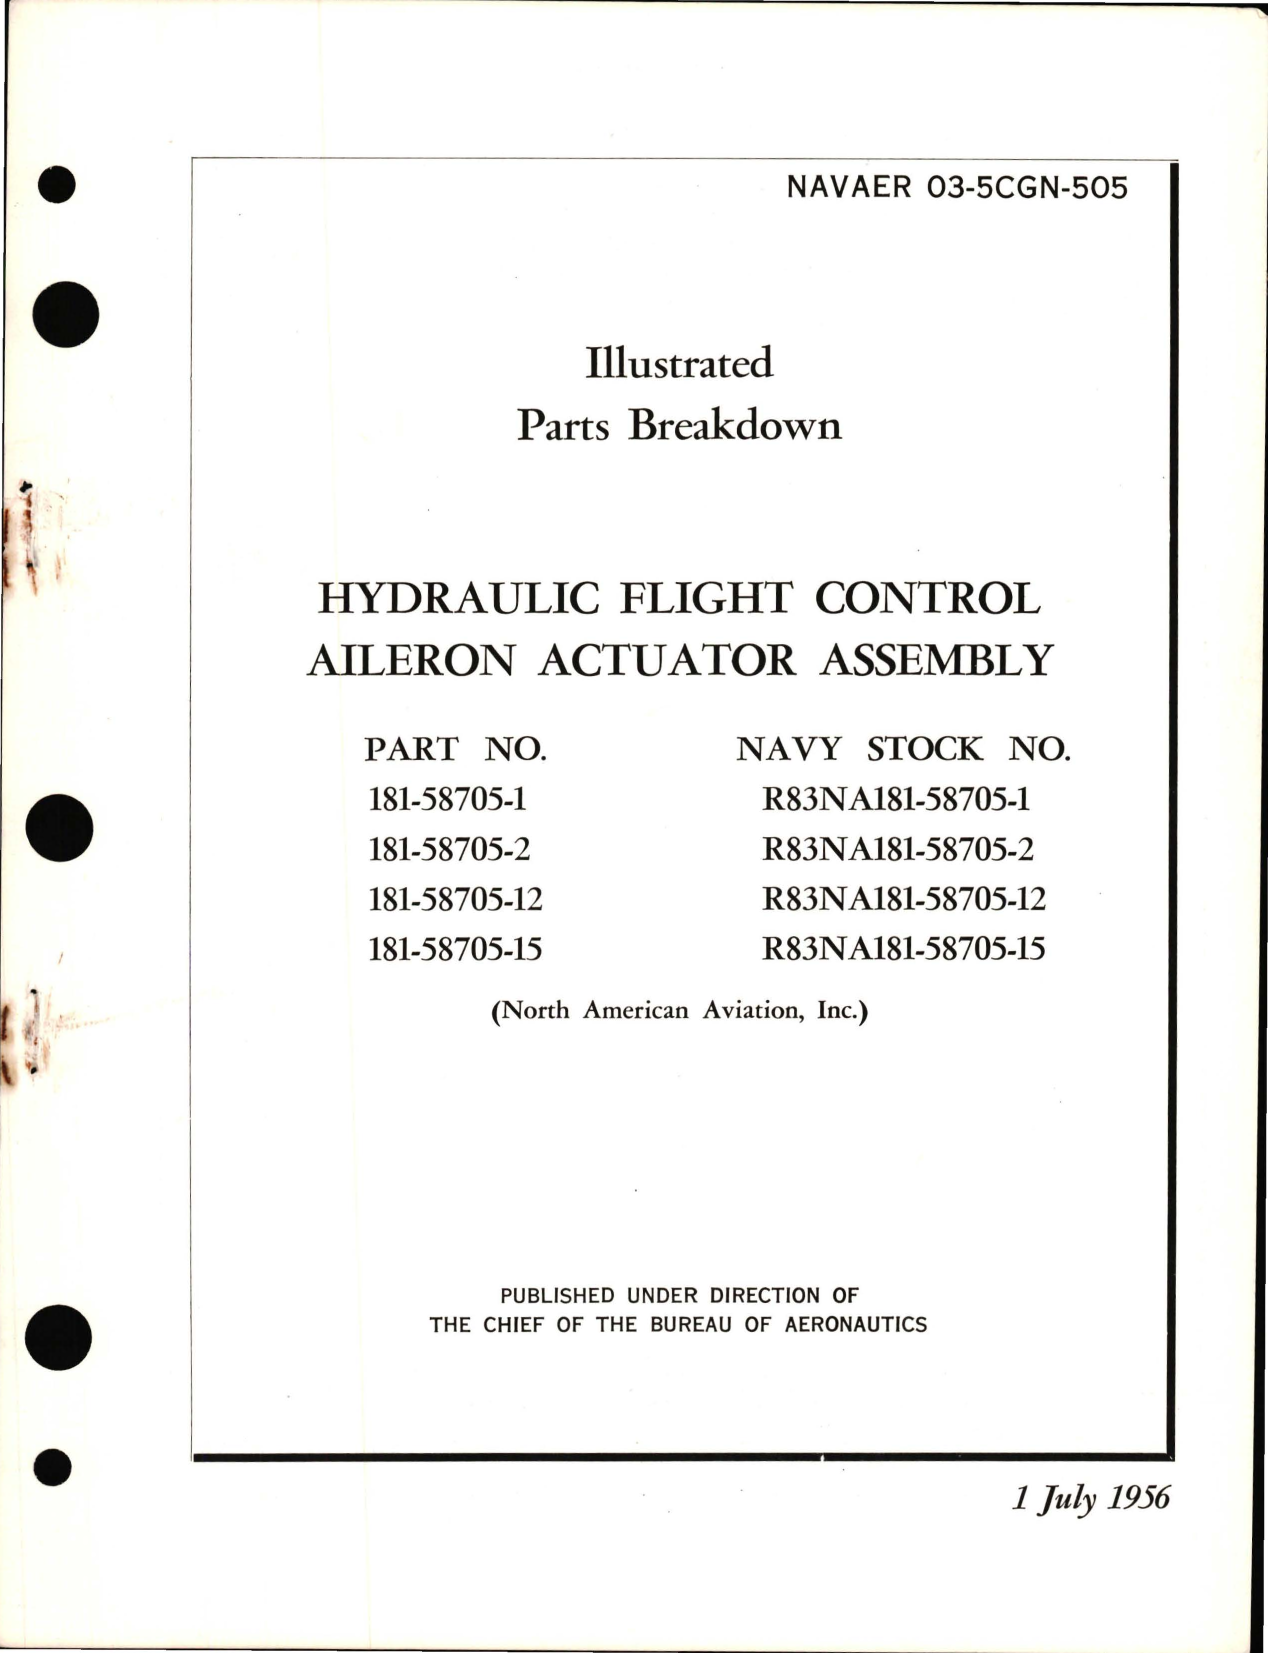 Sample page 1 from AirCorps Library document: Parts Breakdown for Hydraulic Flight Control Aileron Actuator Assembly - Part 181-58705 Series 